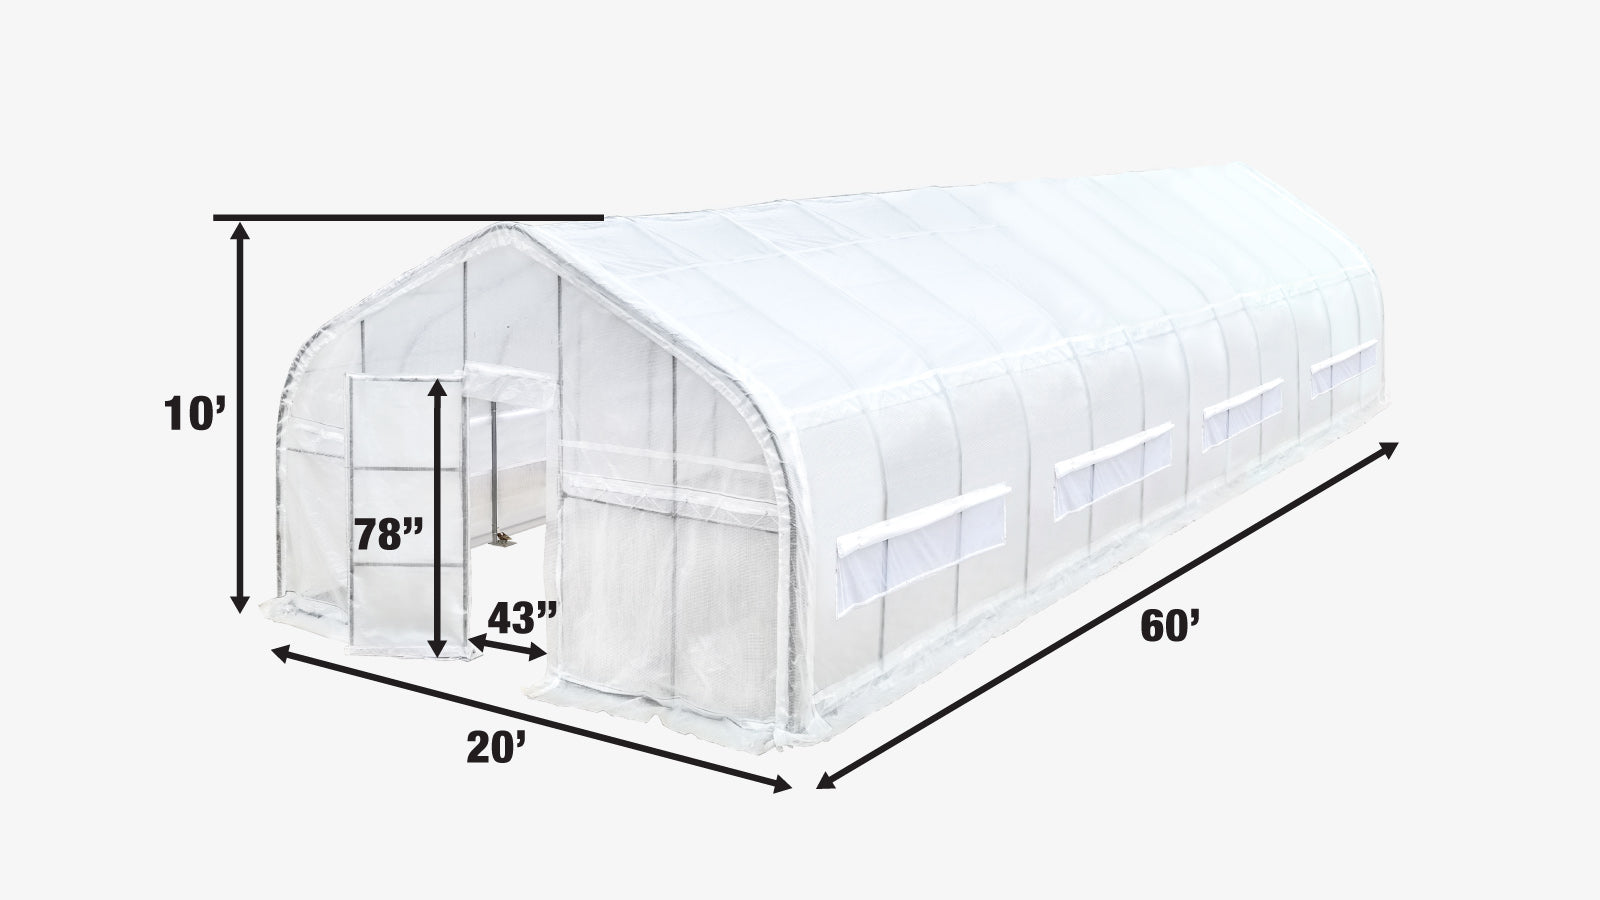 TMG Industrial 20’ x 60’ Tunnel Greenhouse Grow Tent w/12 Mil Ripstop Leno Mesh Cover, Cold Frame, Roll-up Windows, Peak Ceiling Roof, TMG-GH2060-specifications-image